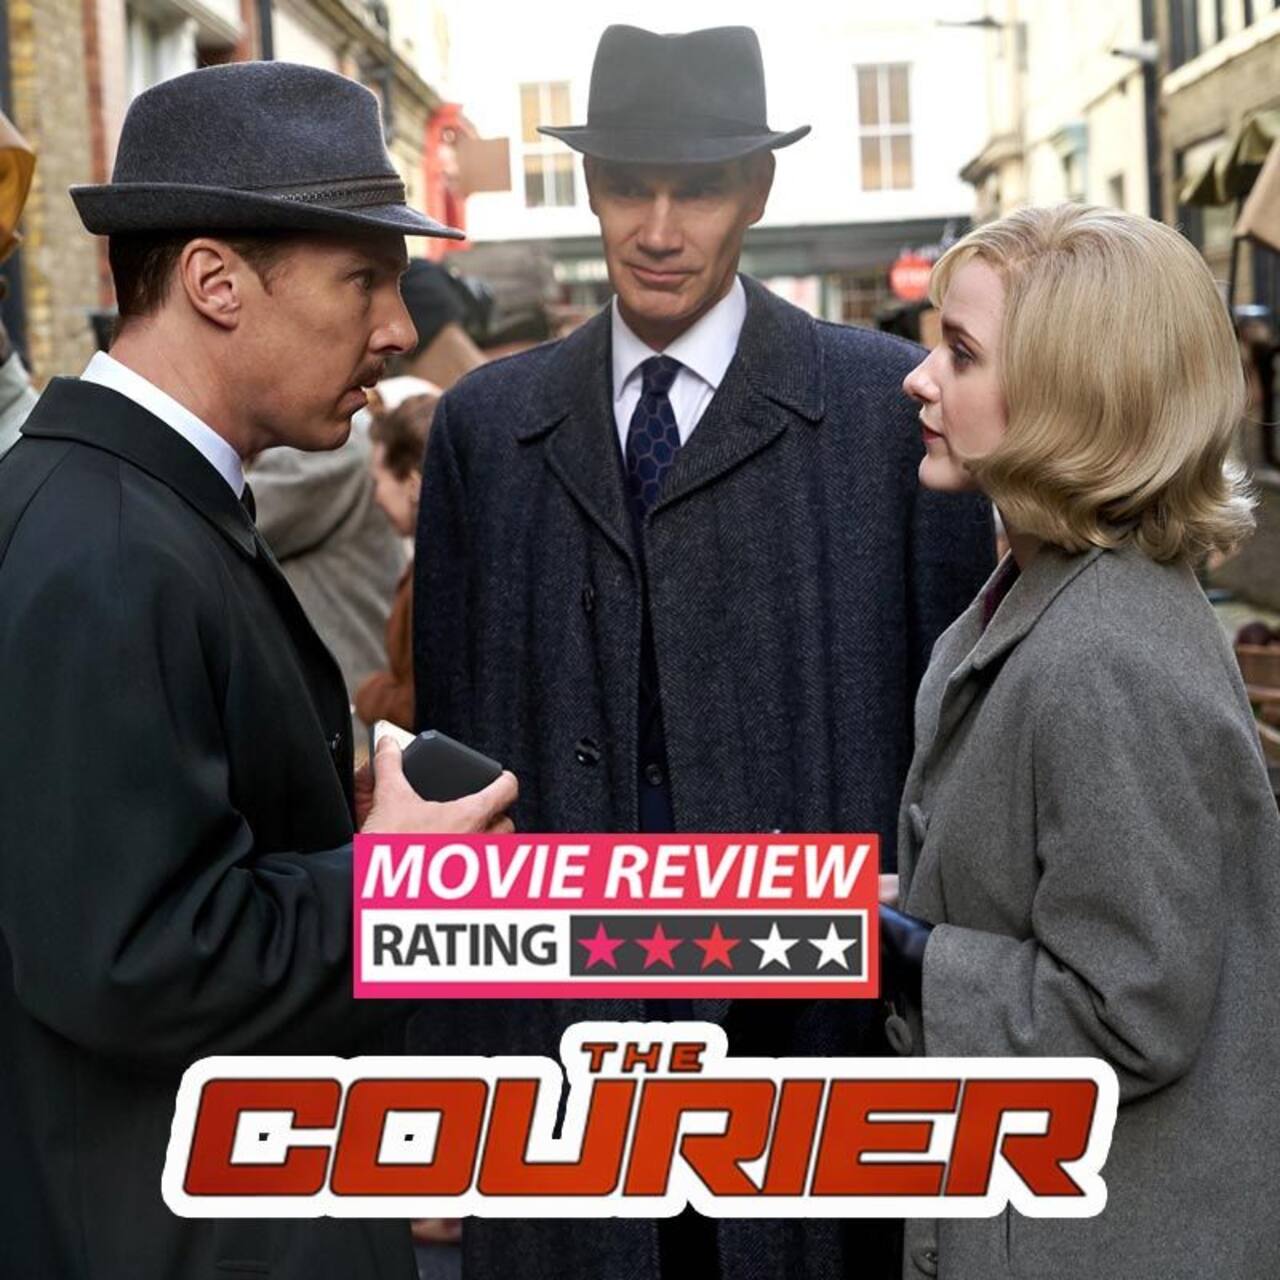 The Courier movie review: Benedict Cumberbatch's spy thriller compromises on the suspense, but scores on the humane front